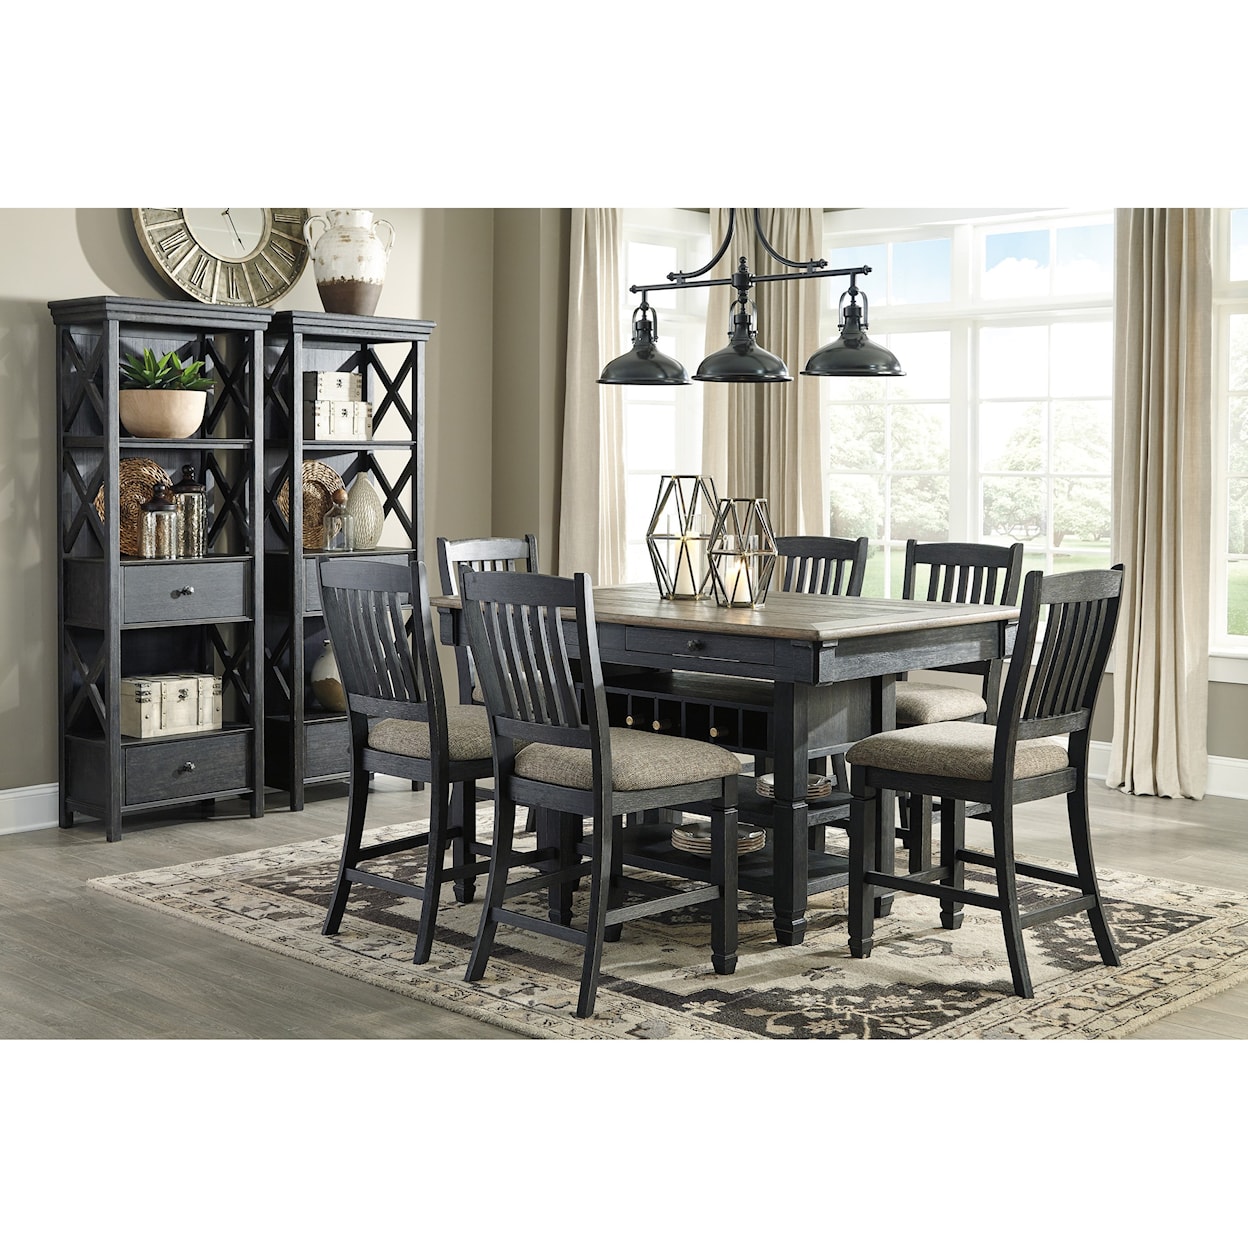 Signature Design by Ashley Furniture Tyler Creek Formal Dining Room Group